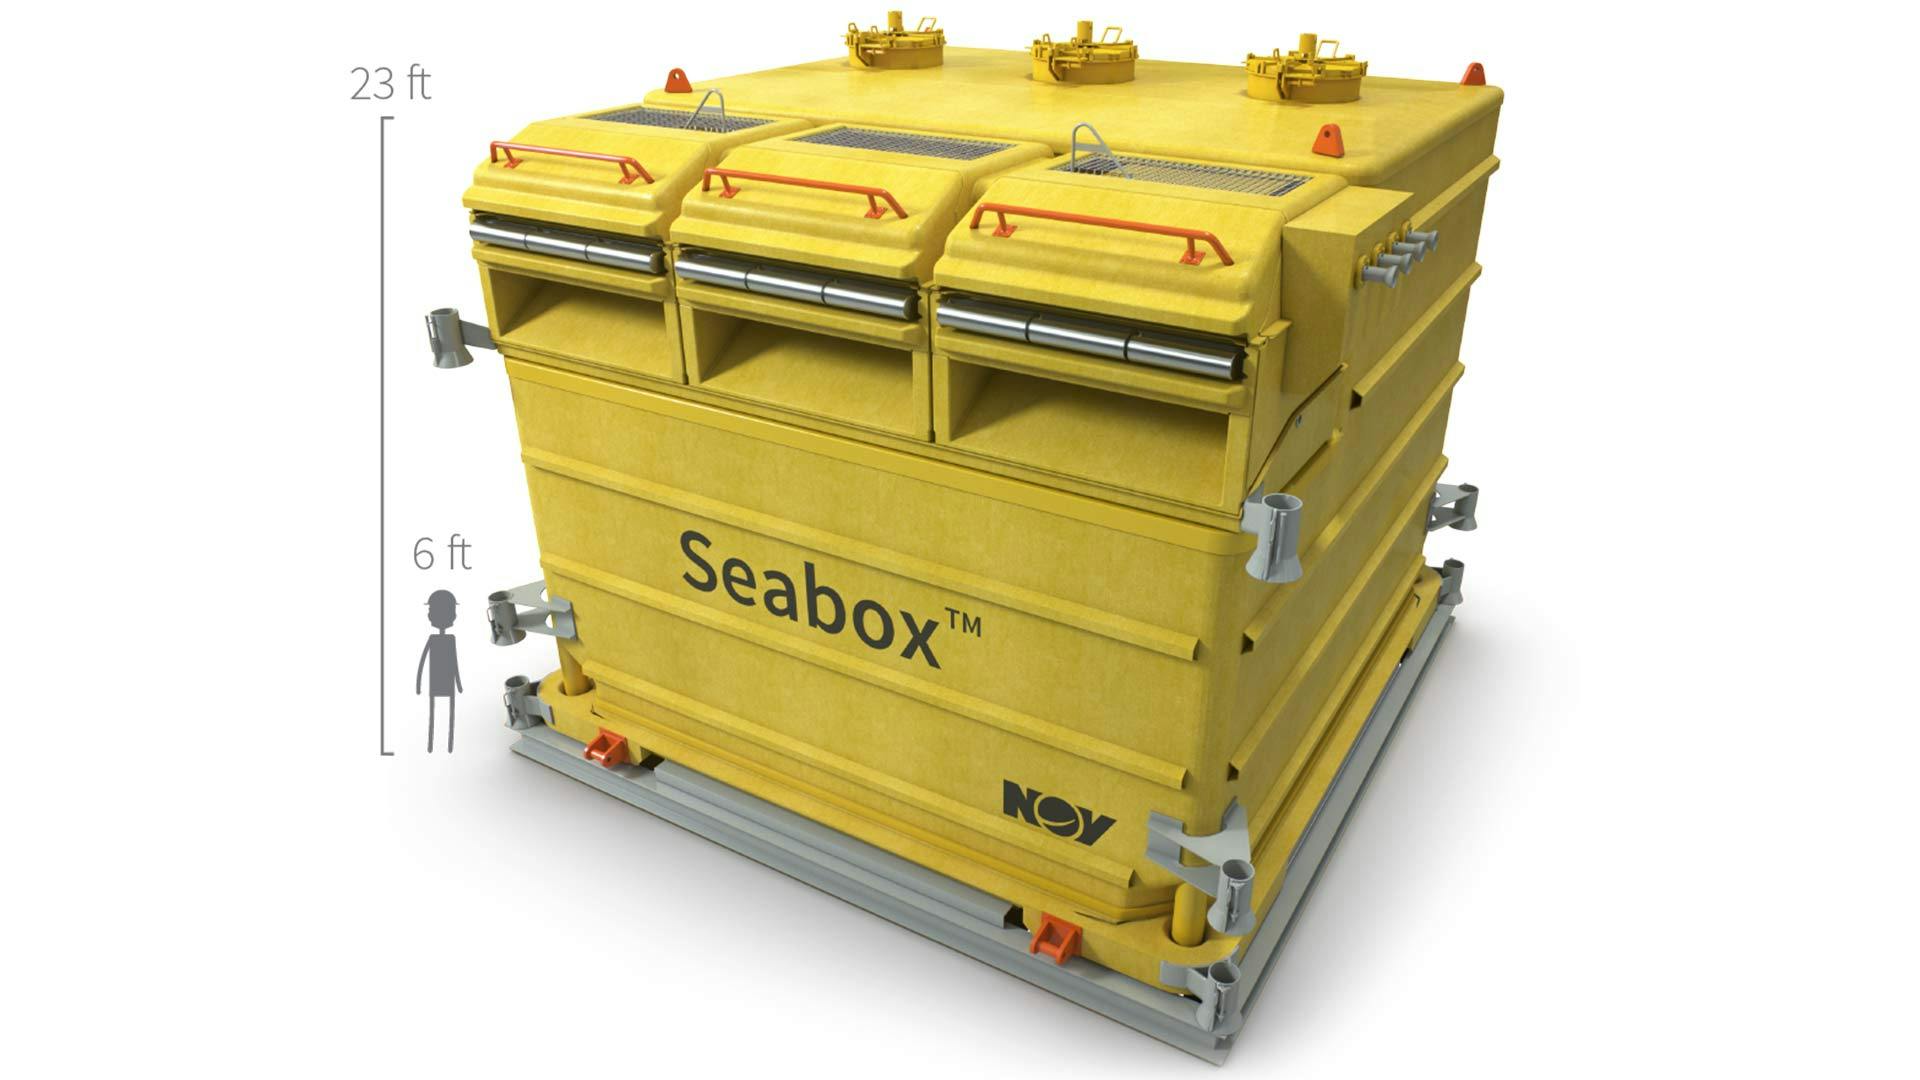 A render demonstrating the size of a Seabox subsea water treatment system